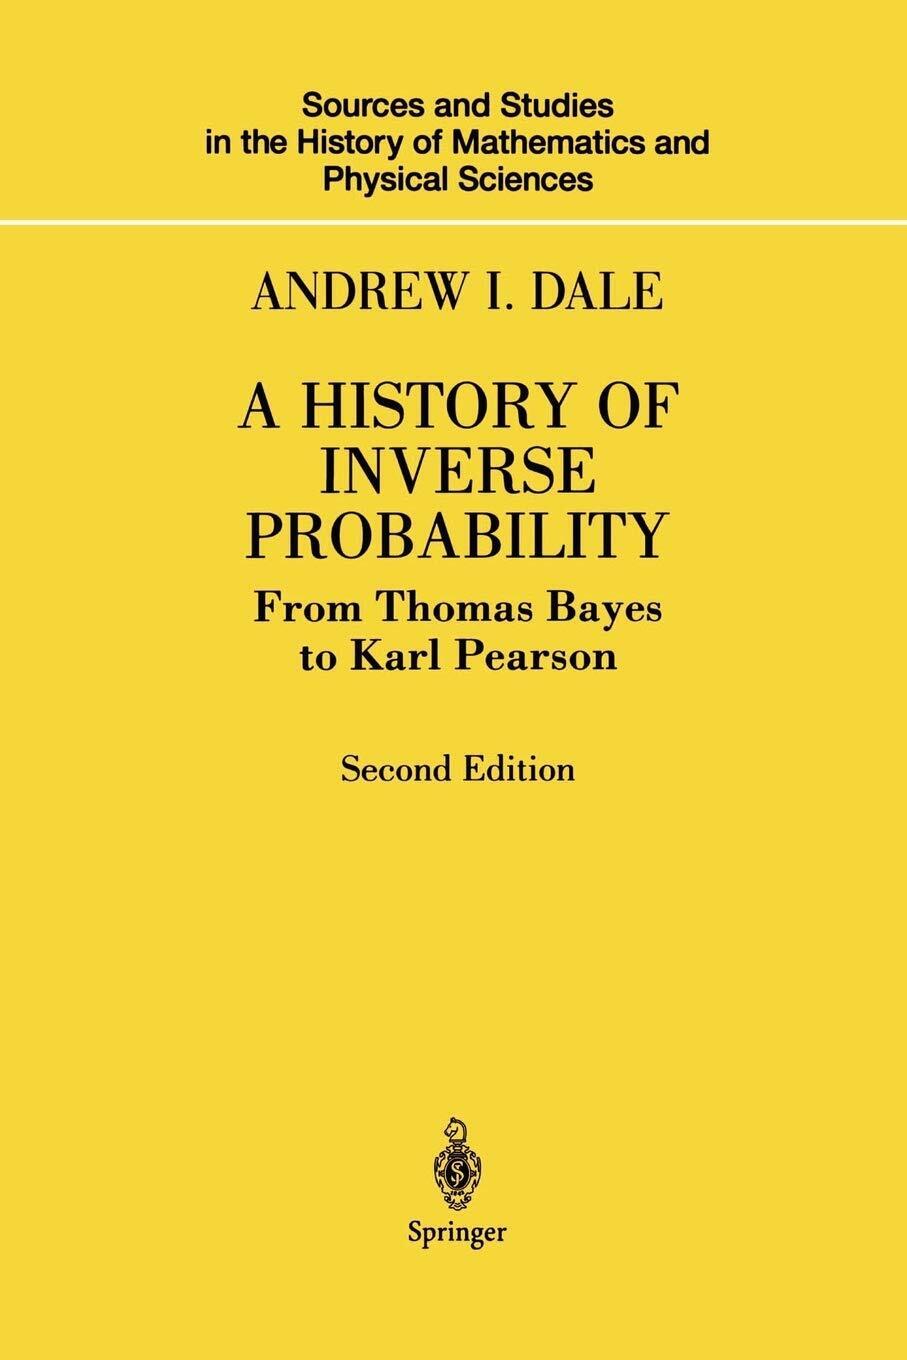 A History of Inverse Probability - Andrew I. Dale - Springer, 2012